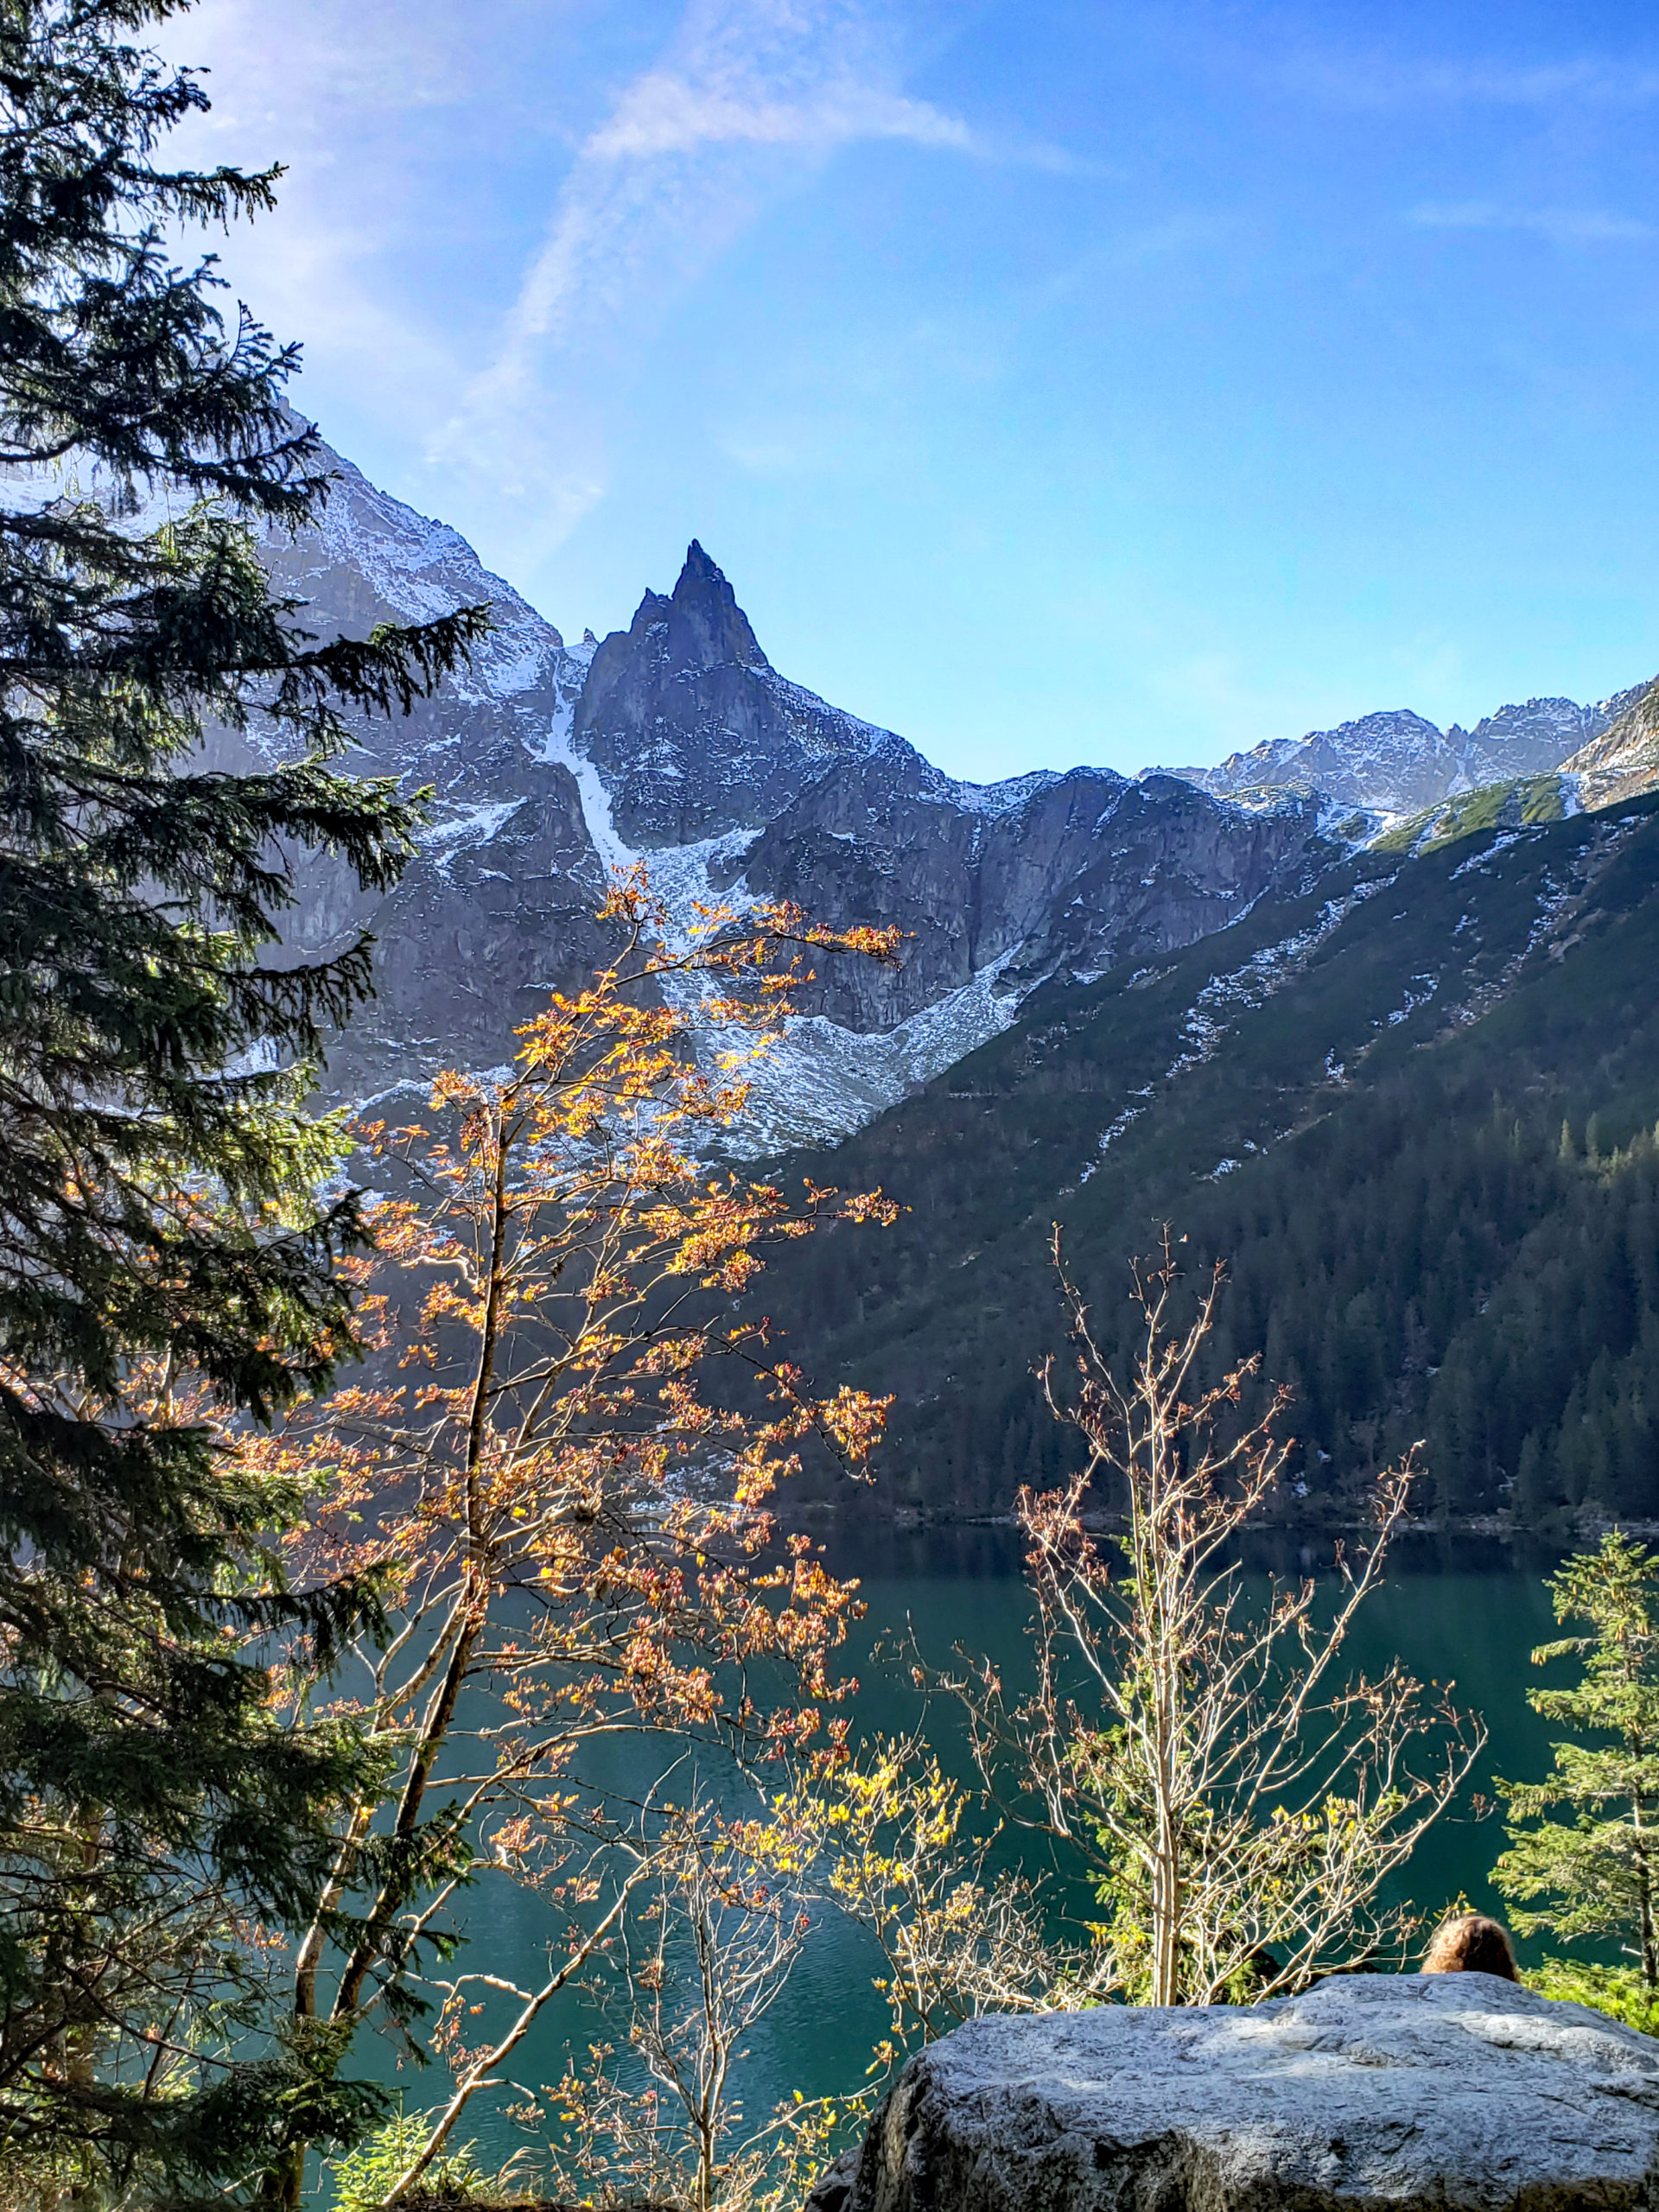 The Complete Guide To Hiking To Morskie Oko - Poland's Most Beautiful Lake In The Tatra Mountains